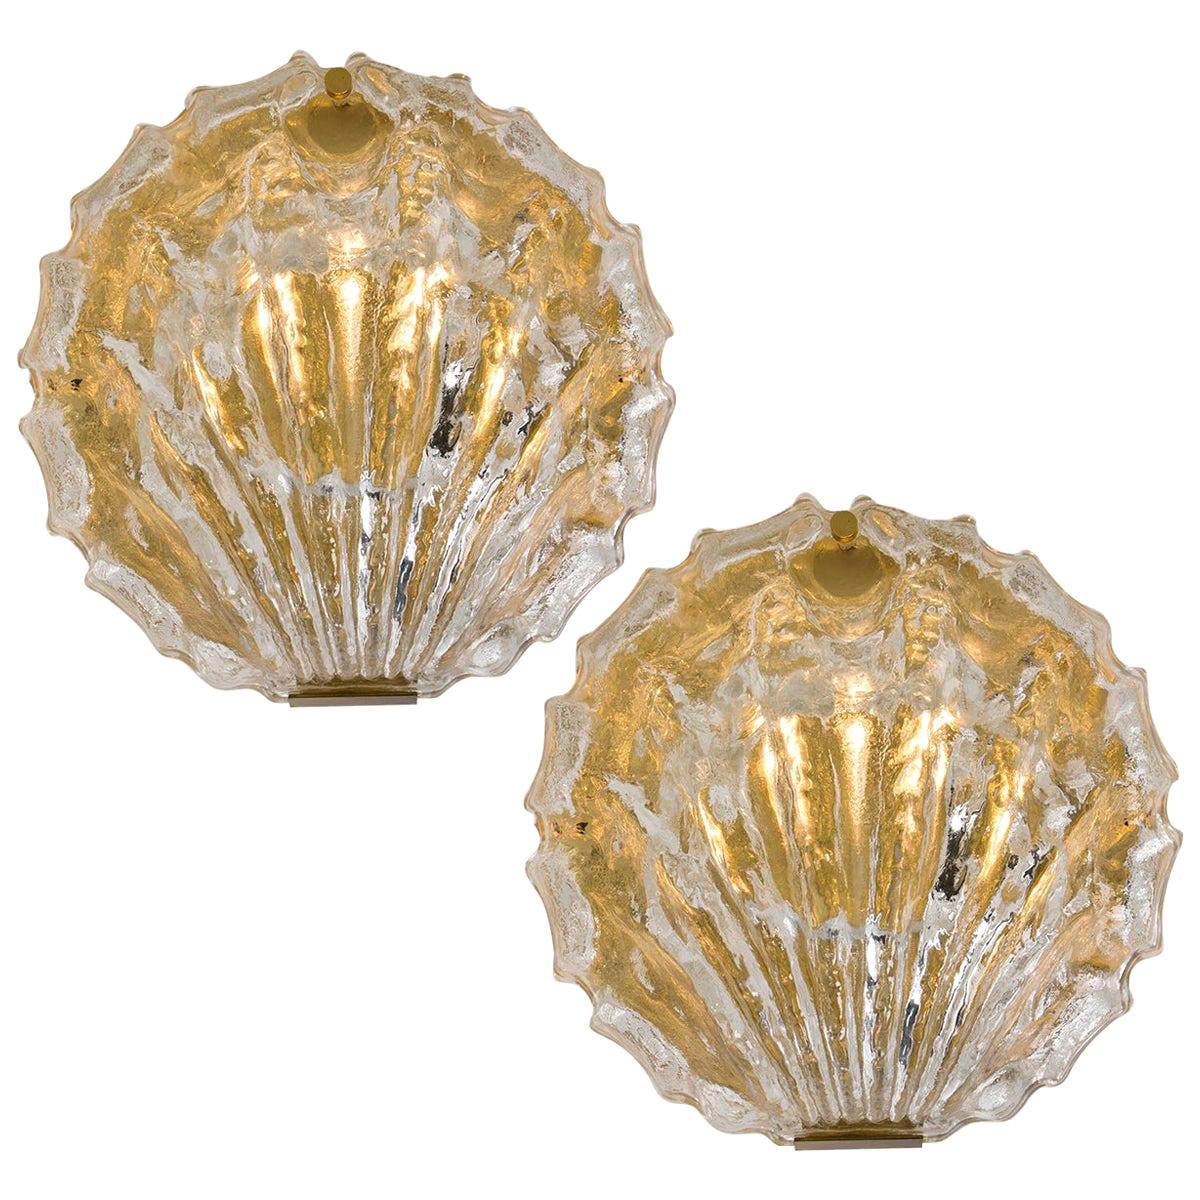 Pair of very exclusive wall lights by J.T. Kalmar handmade and very heavy quality. Each sconce is made of polished brass frames with a large crystal glasses in the form of a shell. Illuminates beautifully.

Please notice the price is for